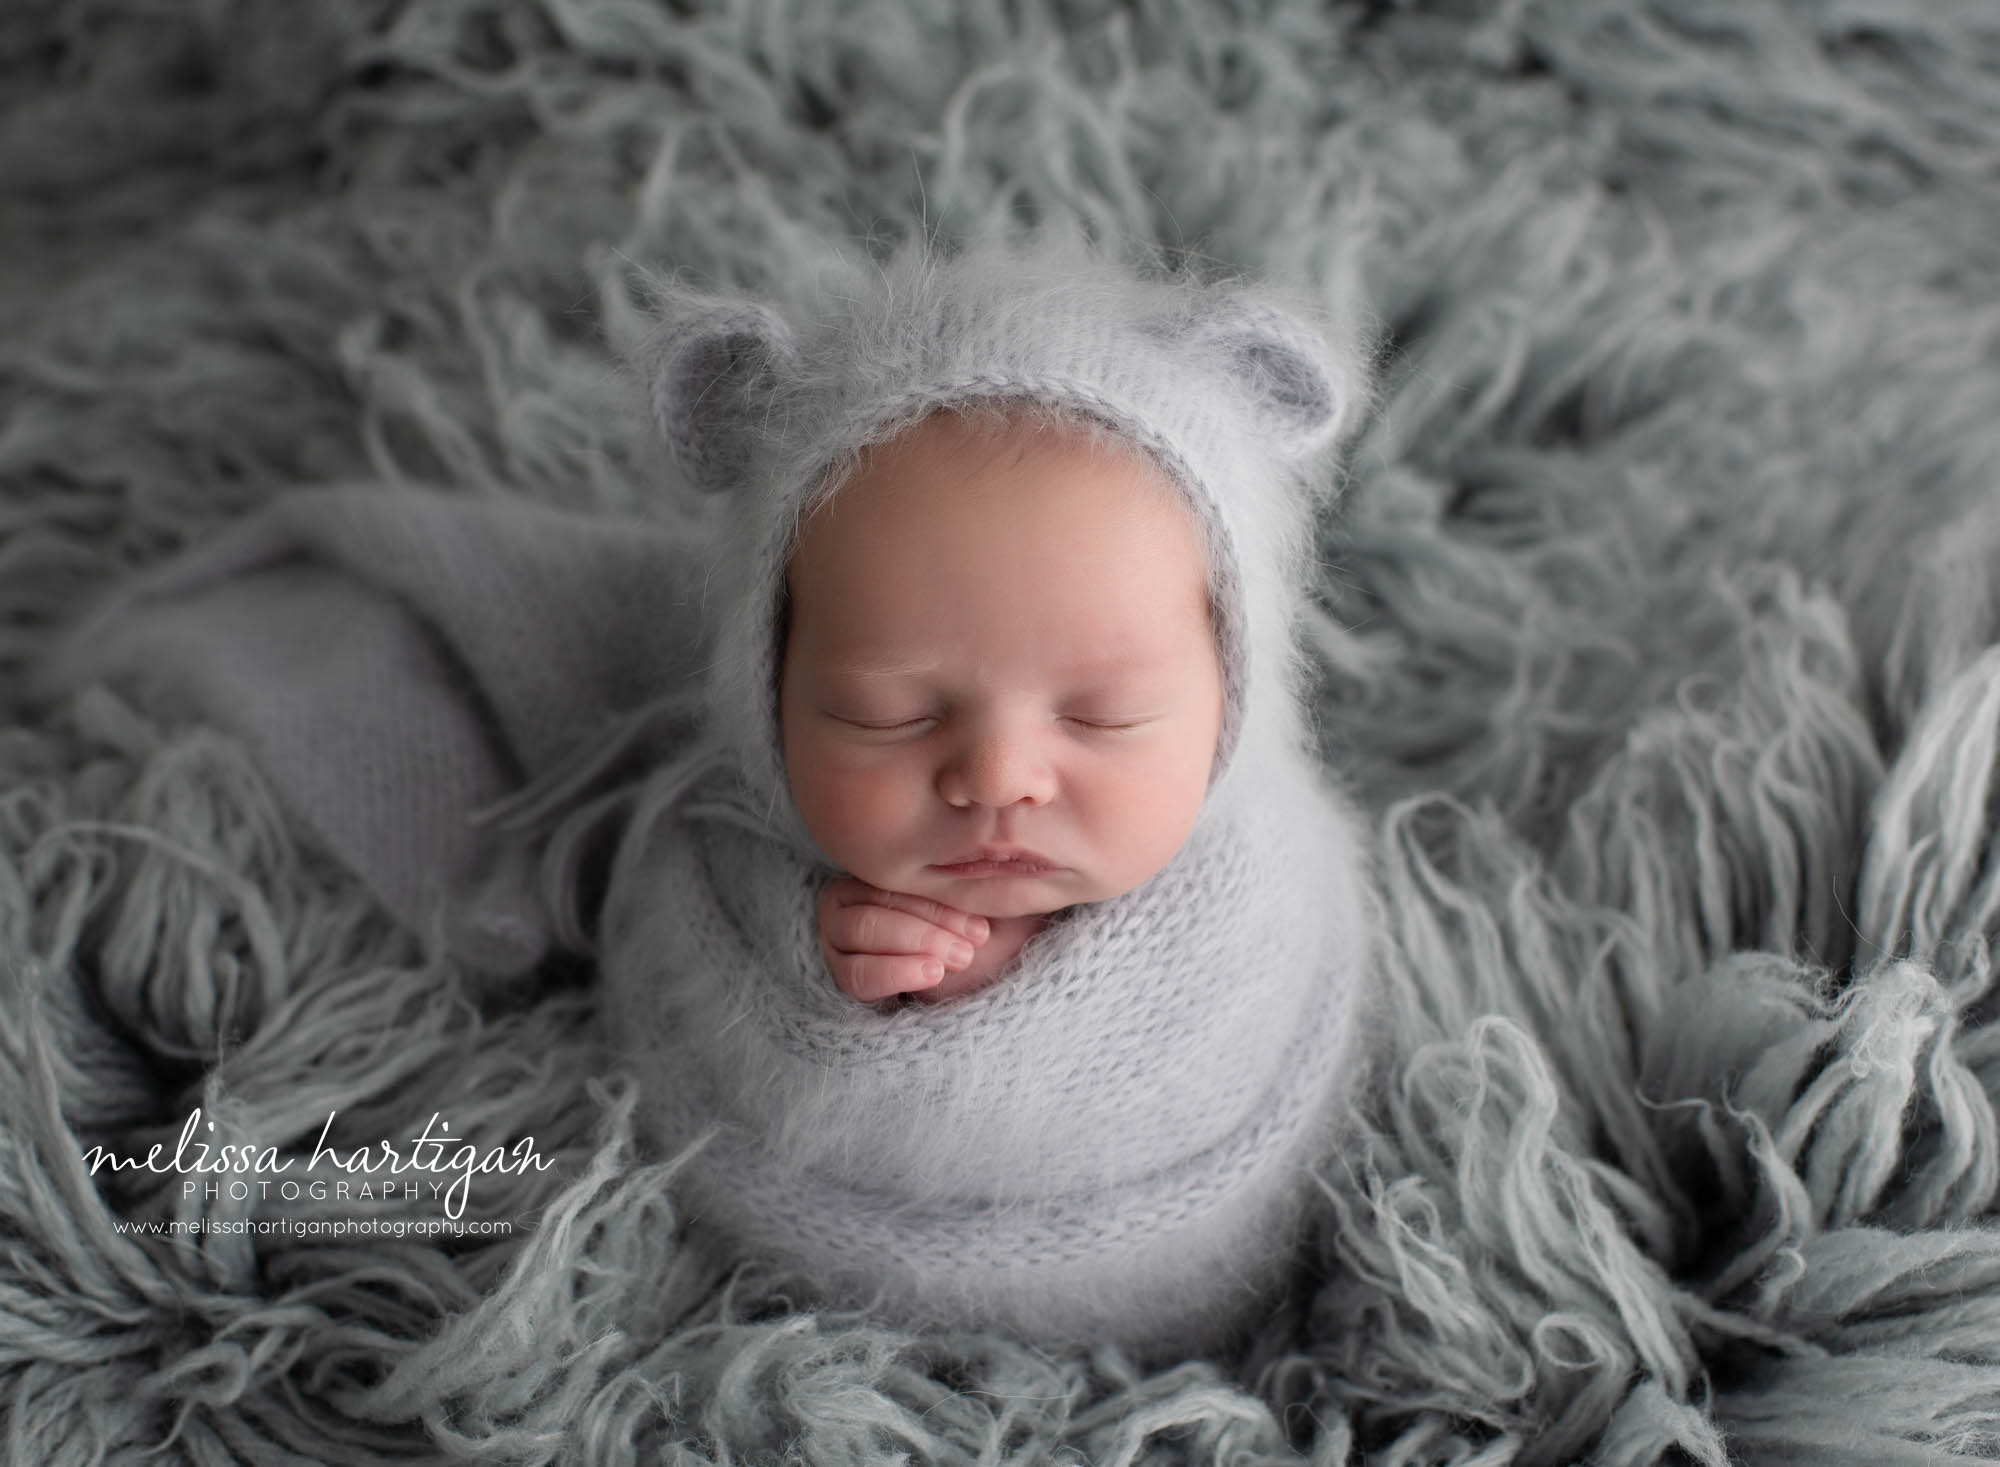 Newborn baby wrapped in angora wrap with bear bonnet in light grey